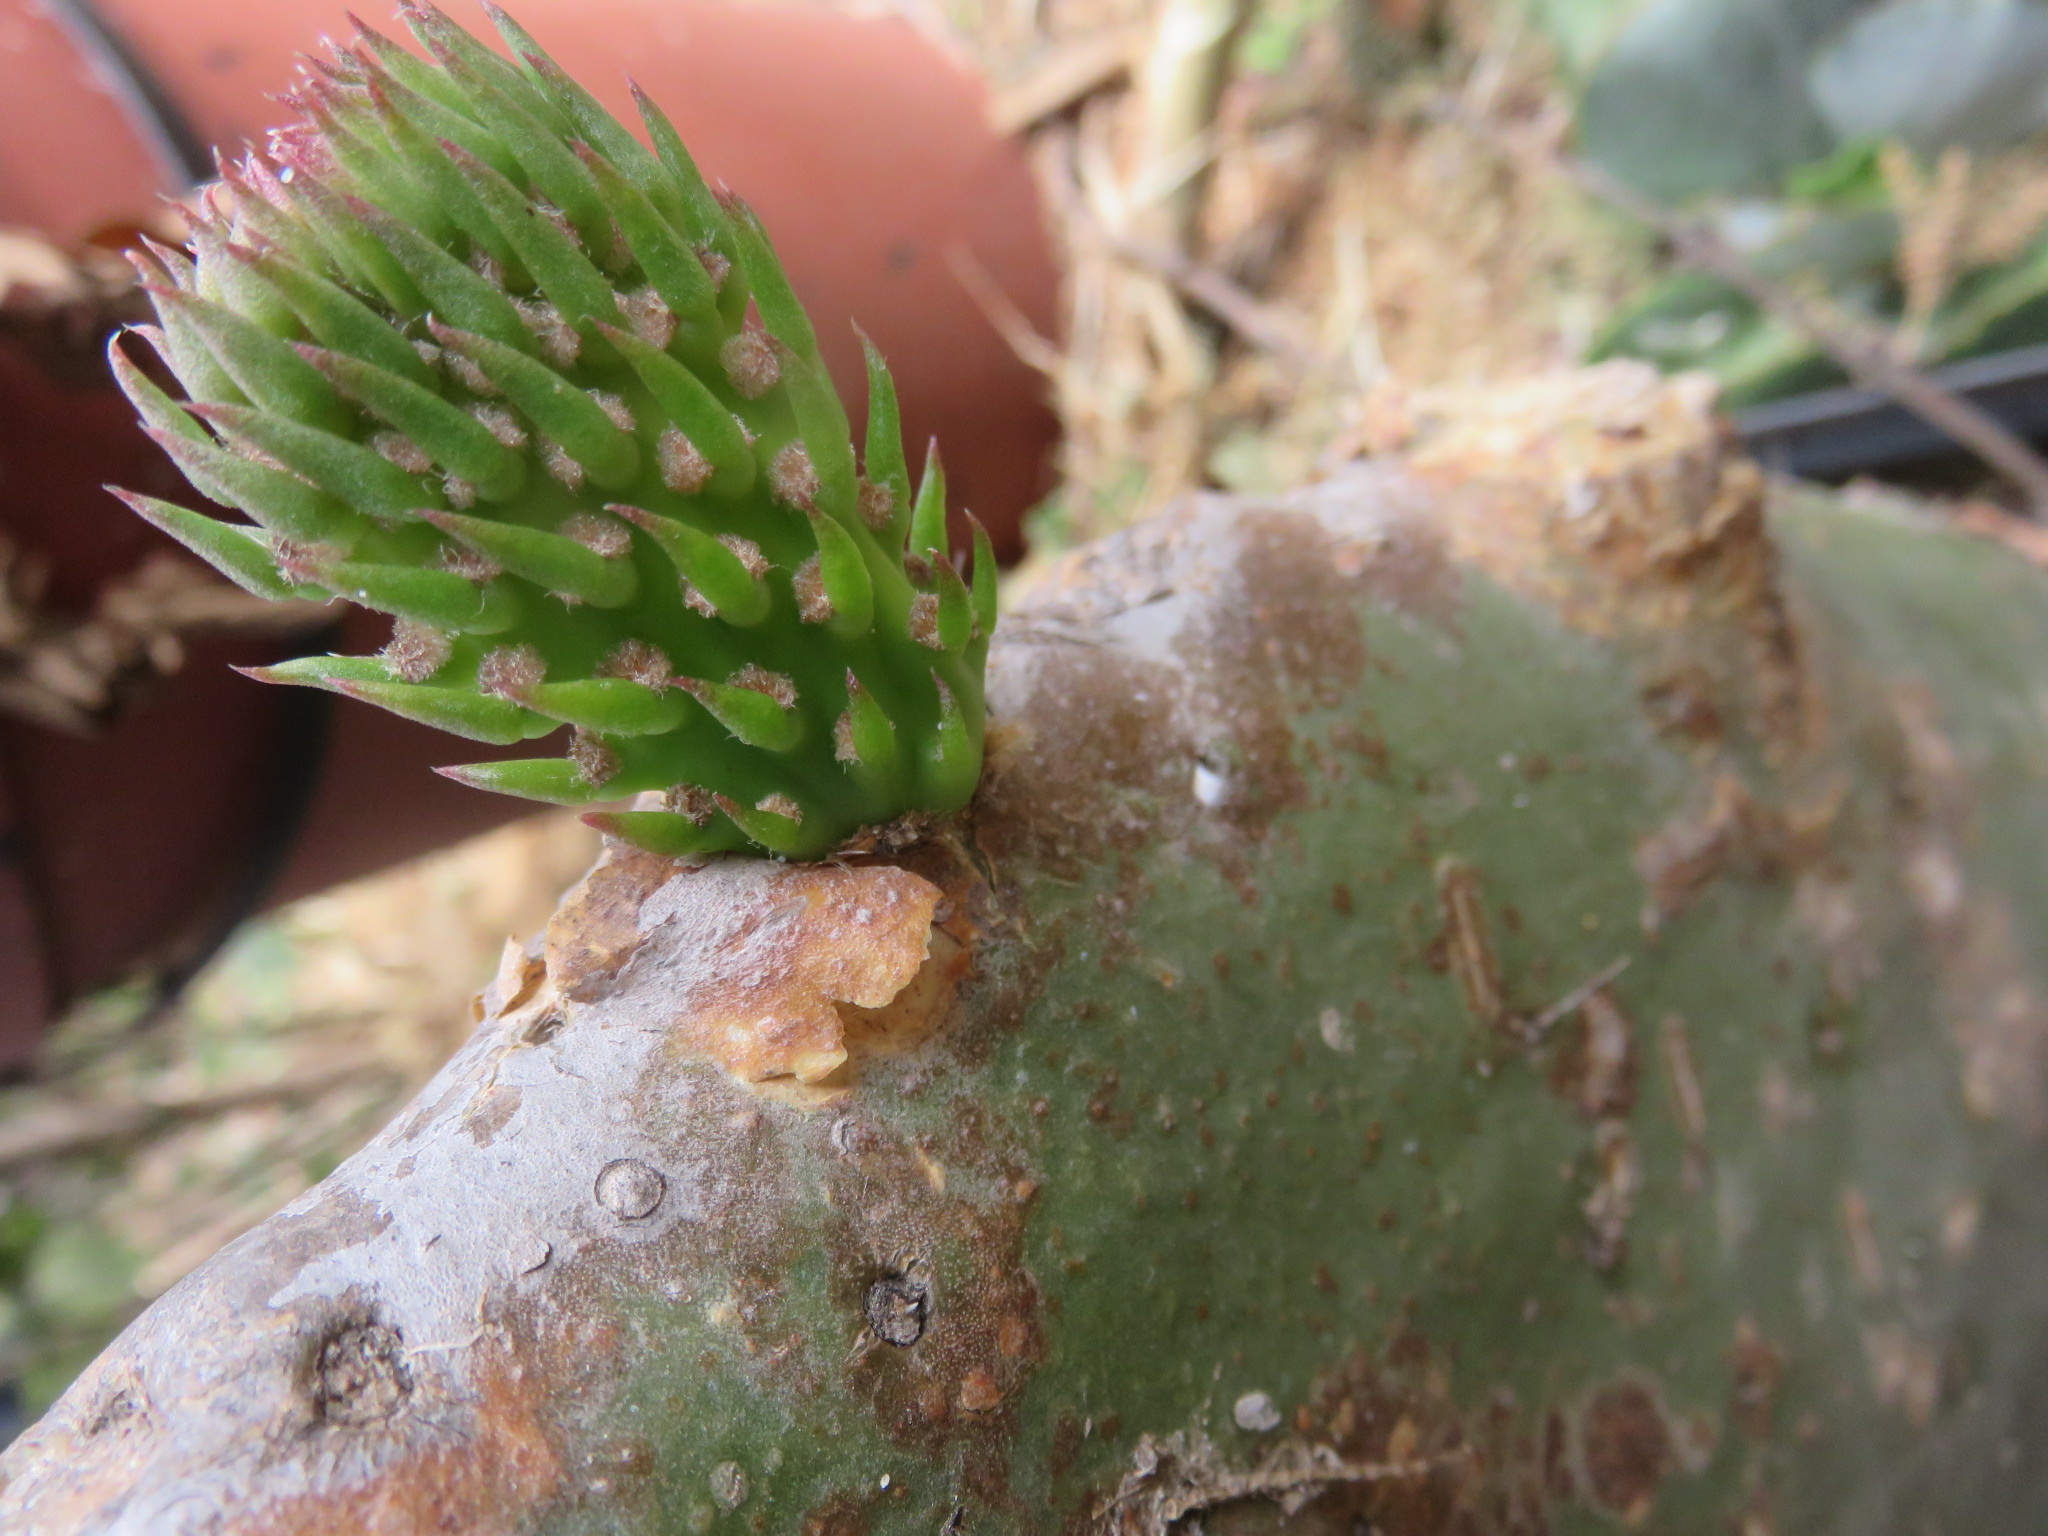 Rough stuff, my Opuntia is doing something, and one day I will too. Nopales yeee heee !